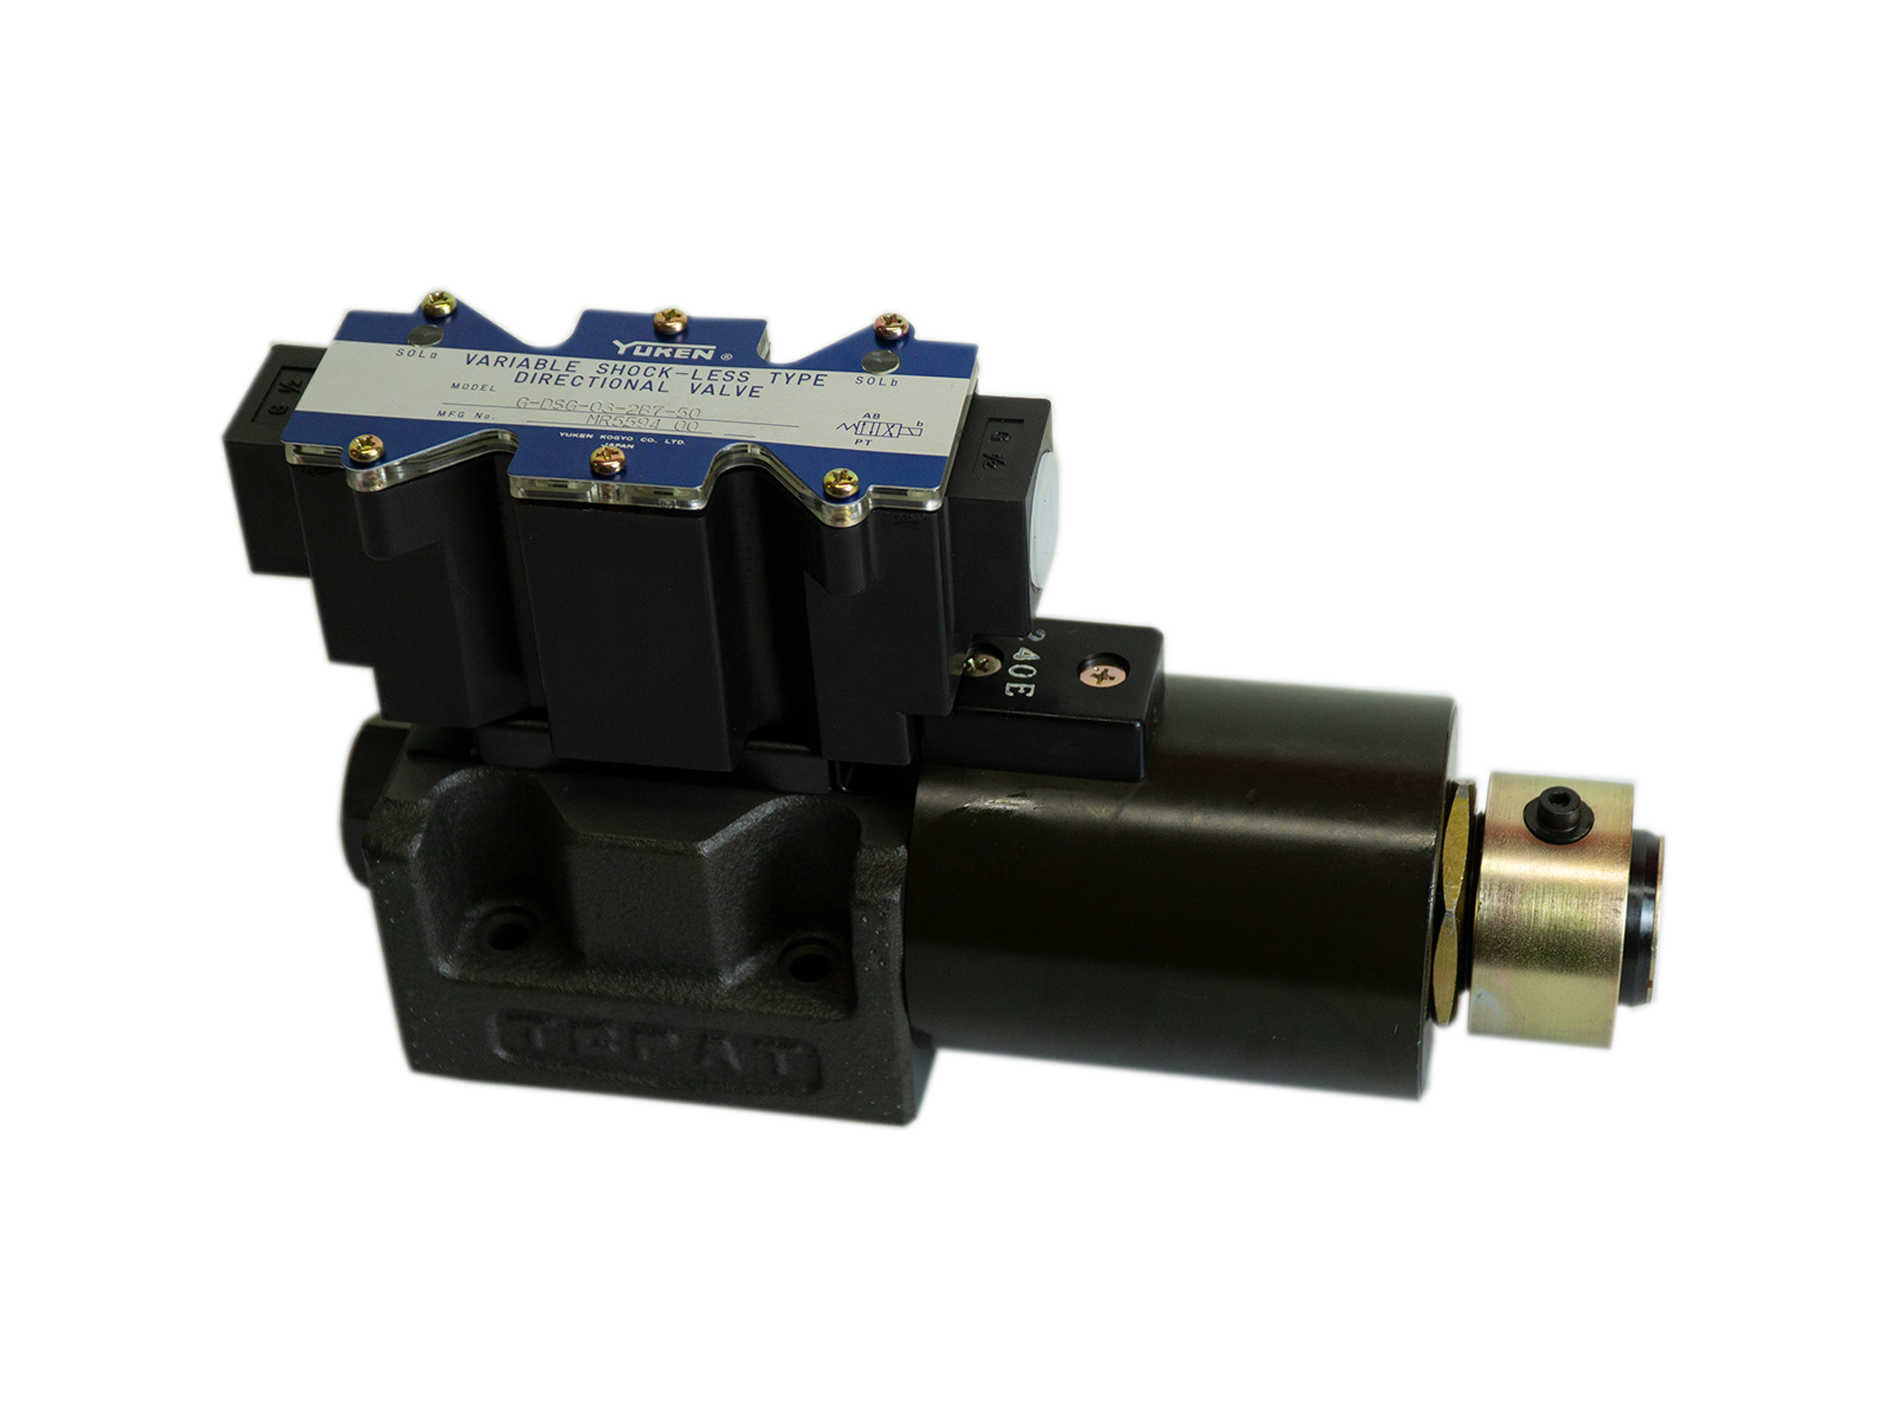 Hydraulic Cetop 3 NG6 Manual Operated Directional Control Valve 